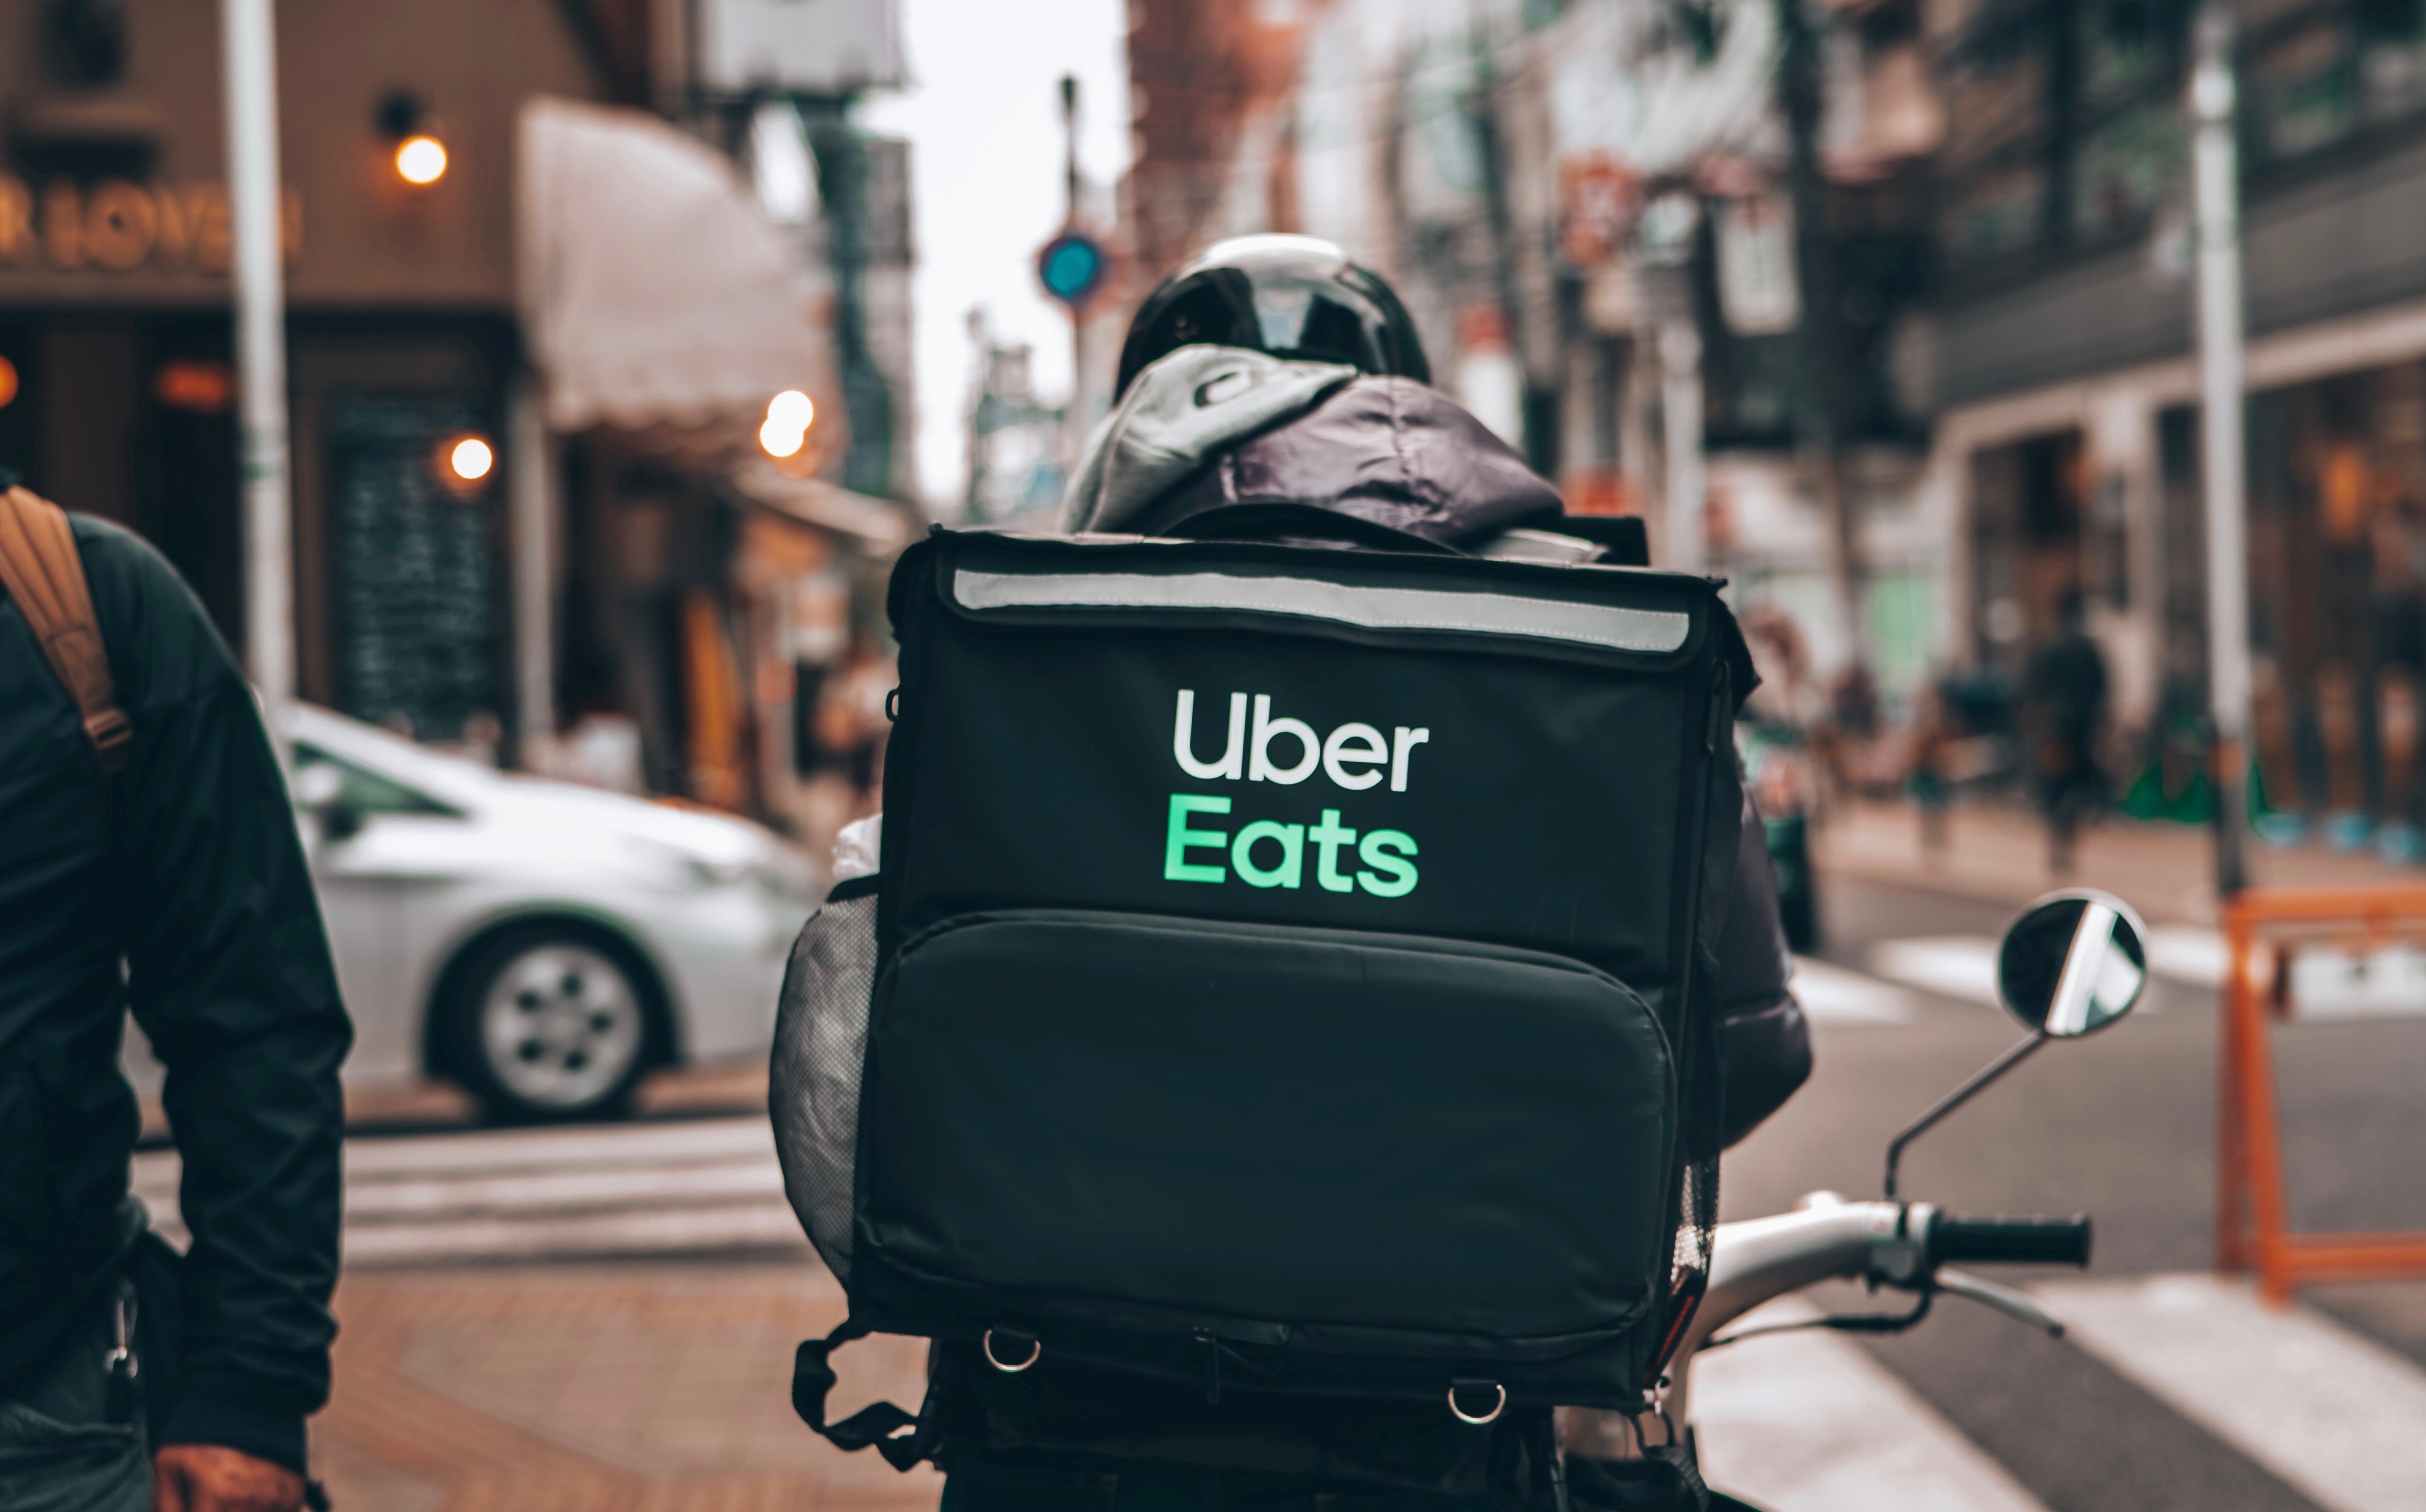 Uber Eats delivery person cycling through the city